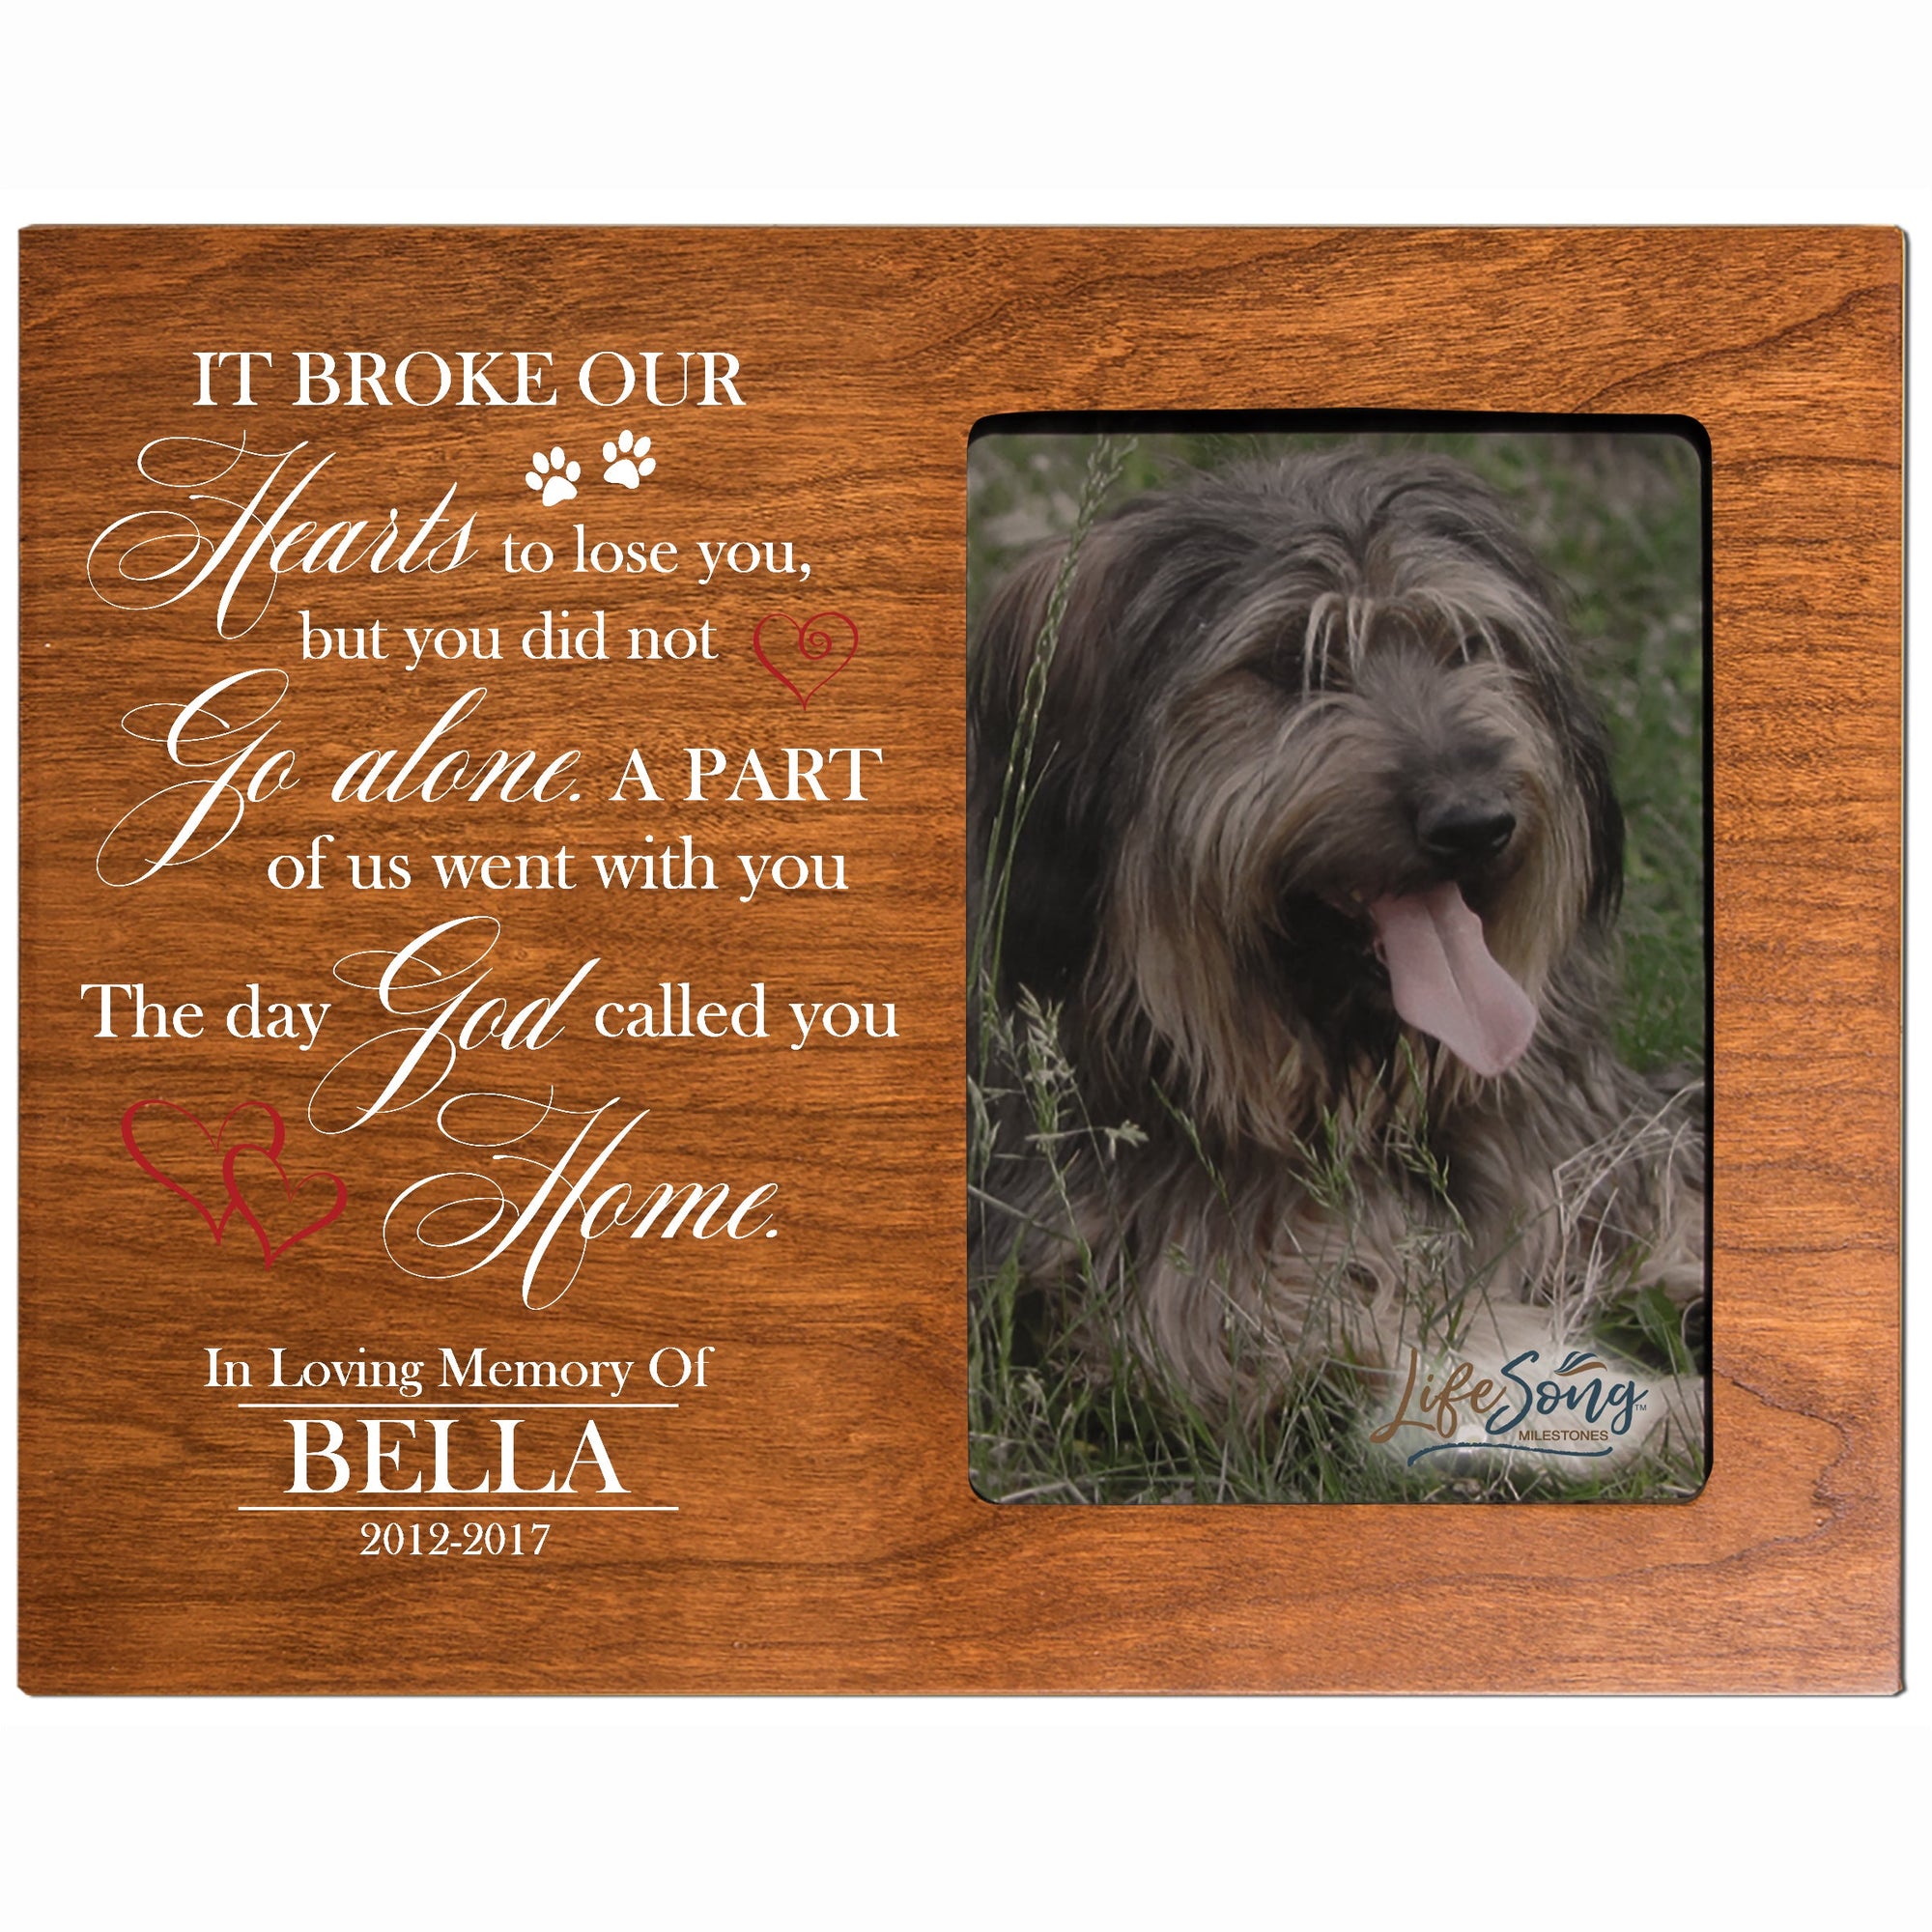 Pet Memorial Picture Frame - It Broke Our Hearts To Lose You